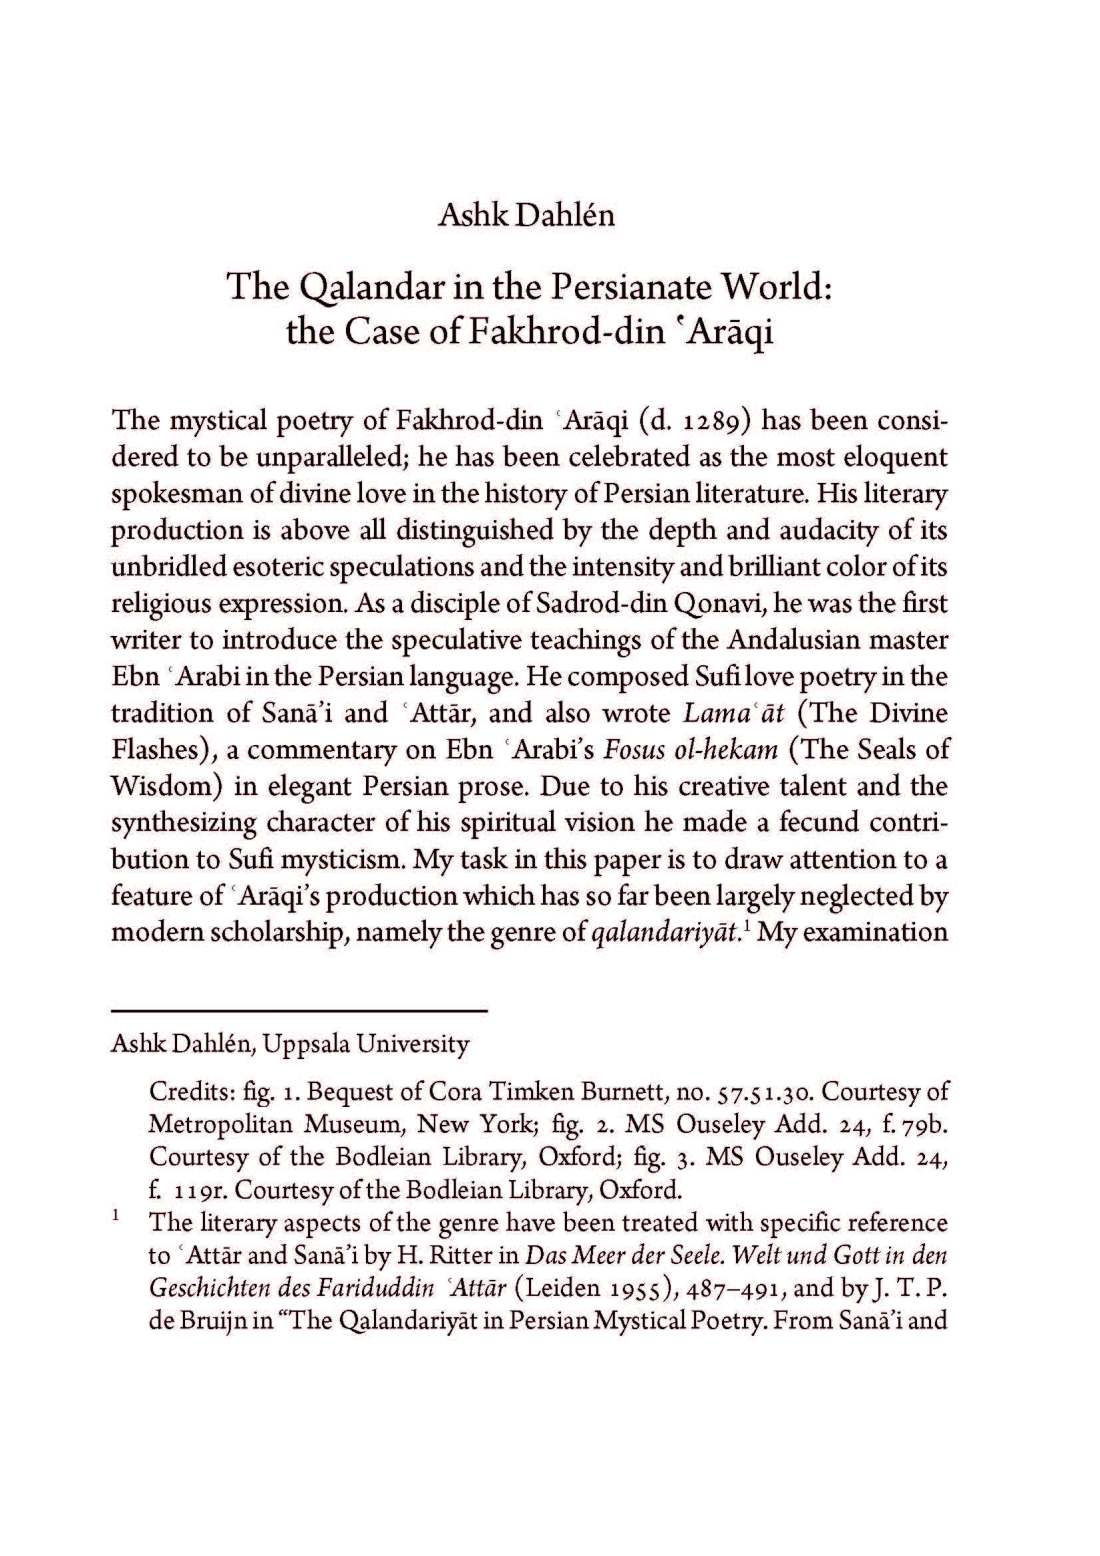 the_qalandar_in_the_persianate_world_the_Page_01